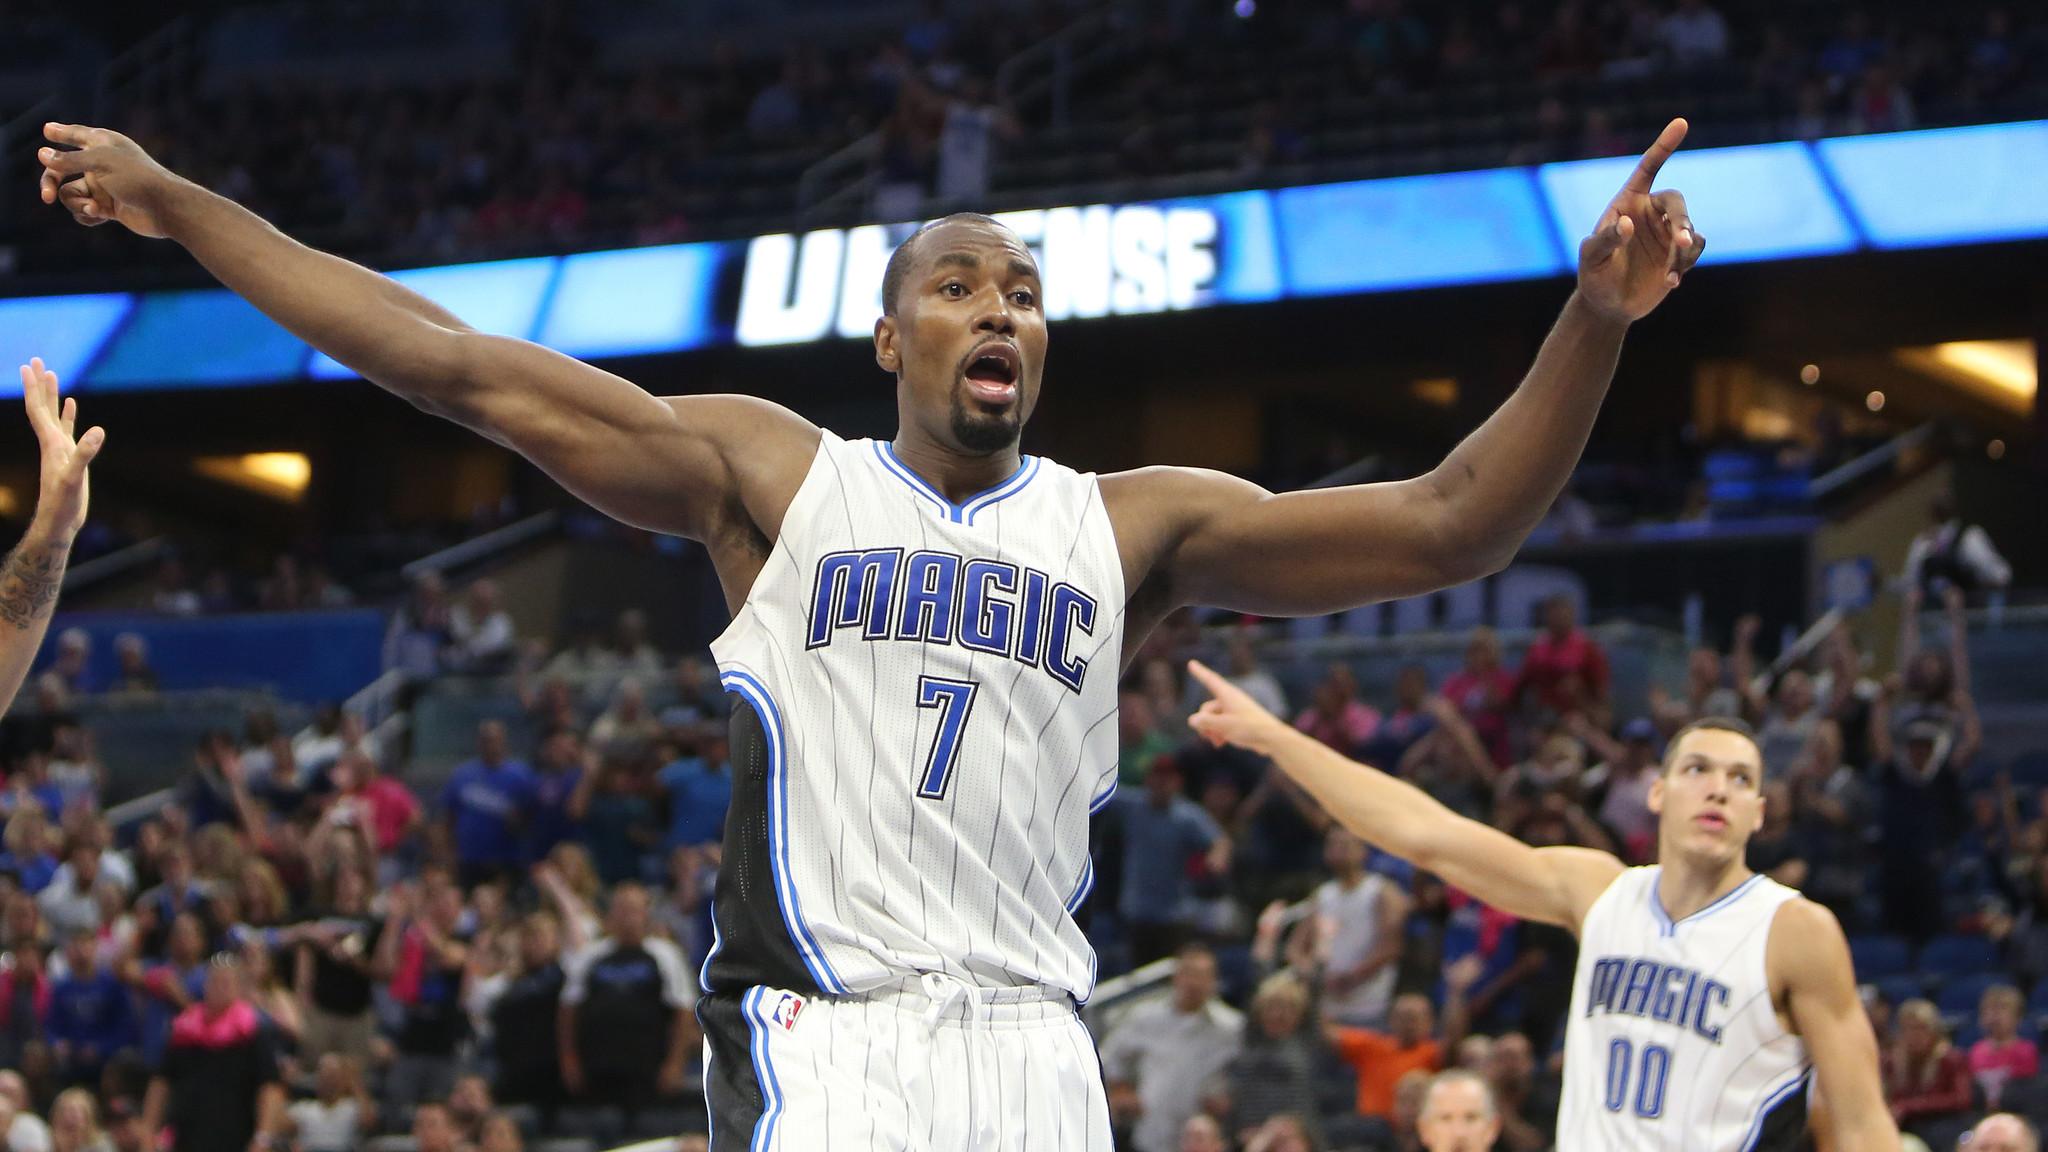 Serge Ibaka: 'I'm just going to ask the Magic fans to keep believing